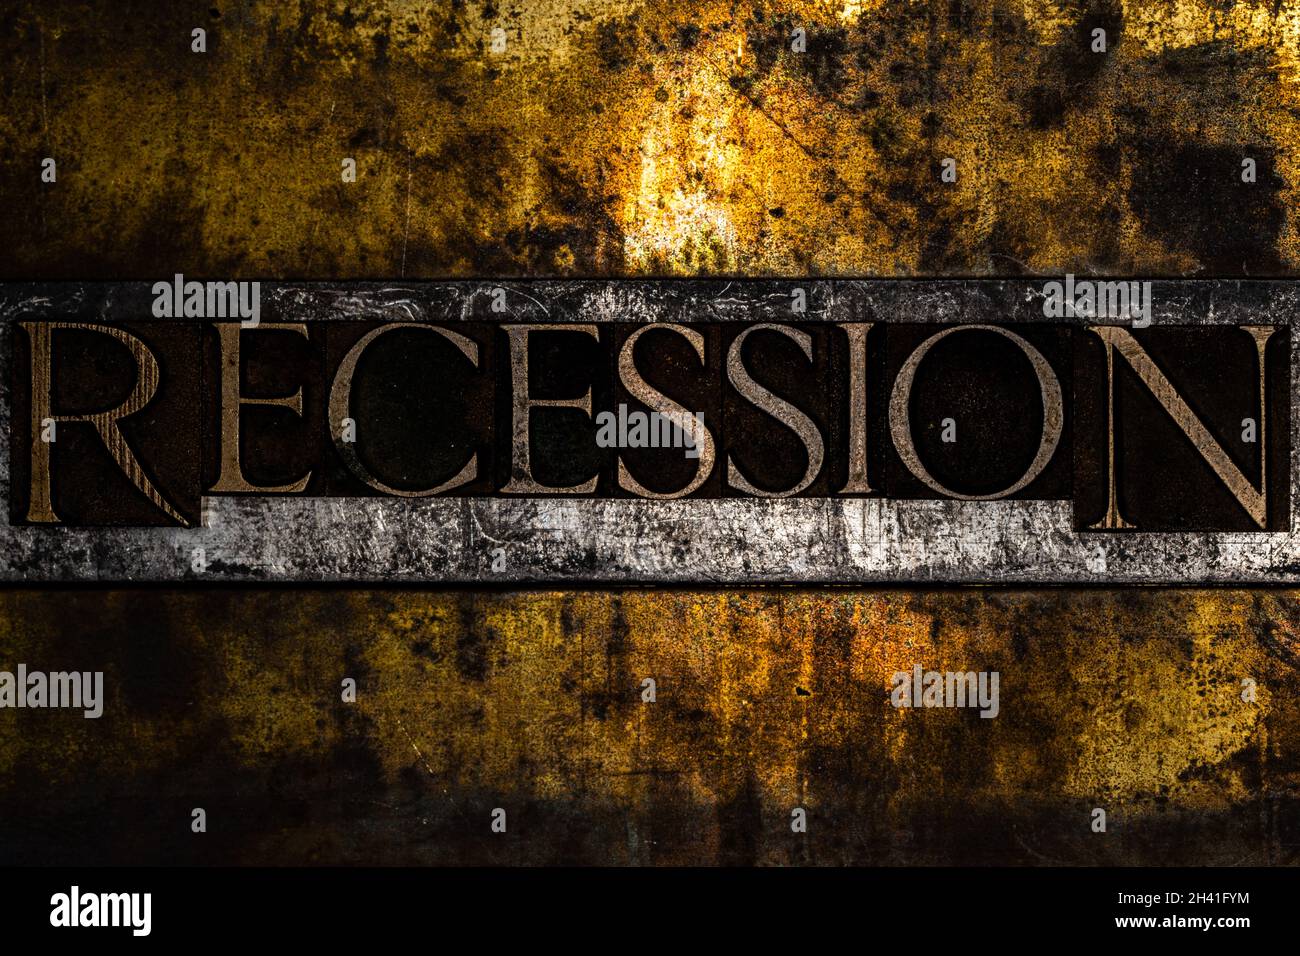 Recession text formed by real authentic typeset letters on vintage textured grunge copper and black background Stock Photo